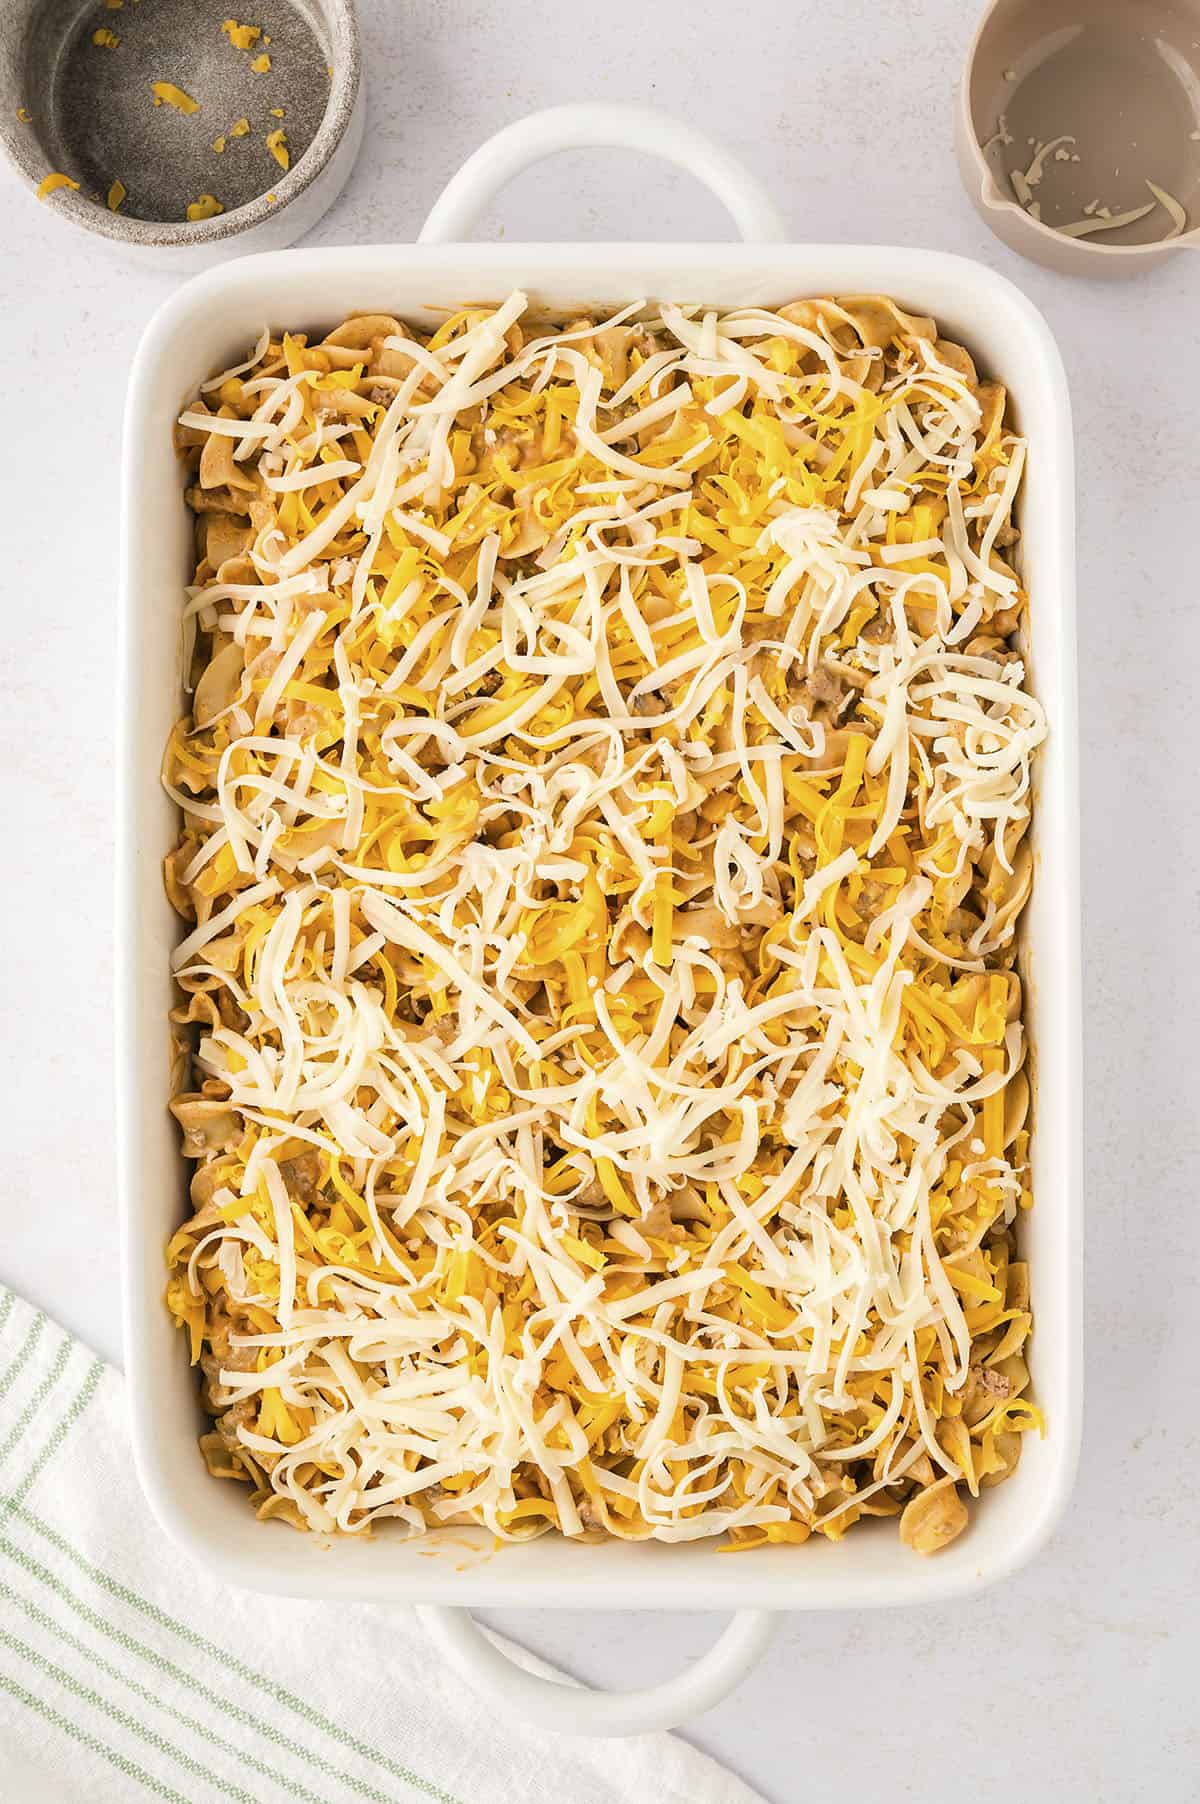 Enchilada casserole in baking dish topped with cheese.